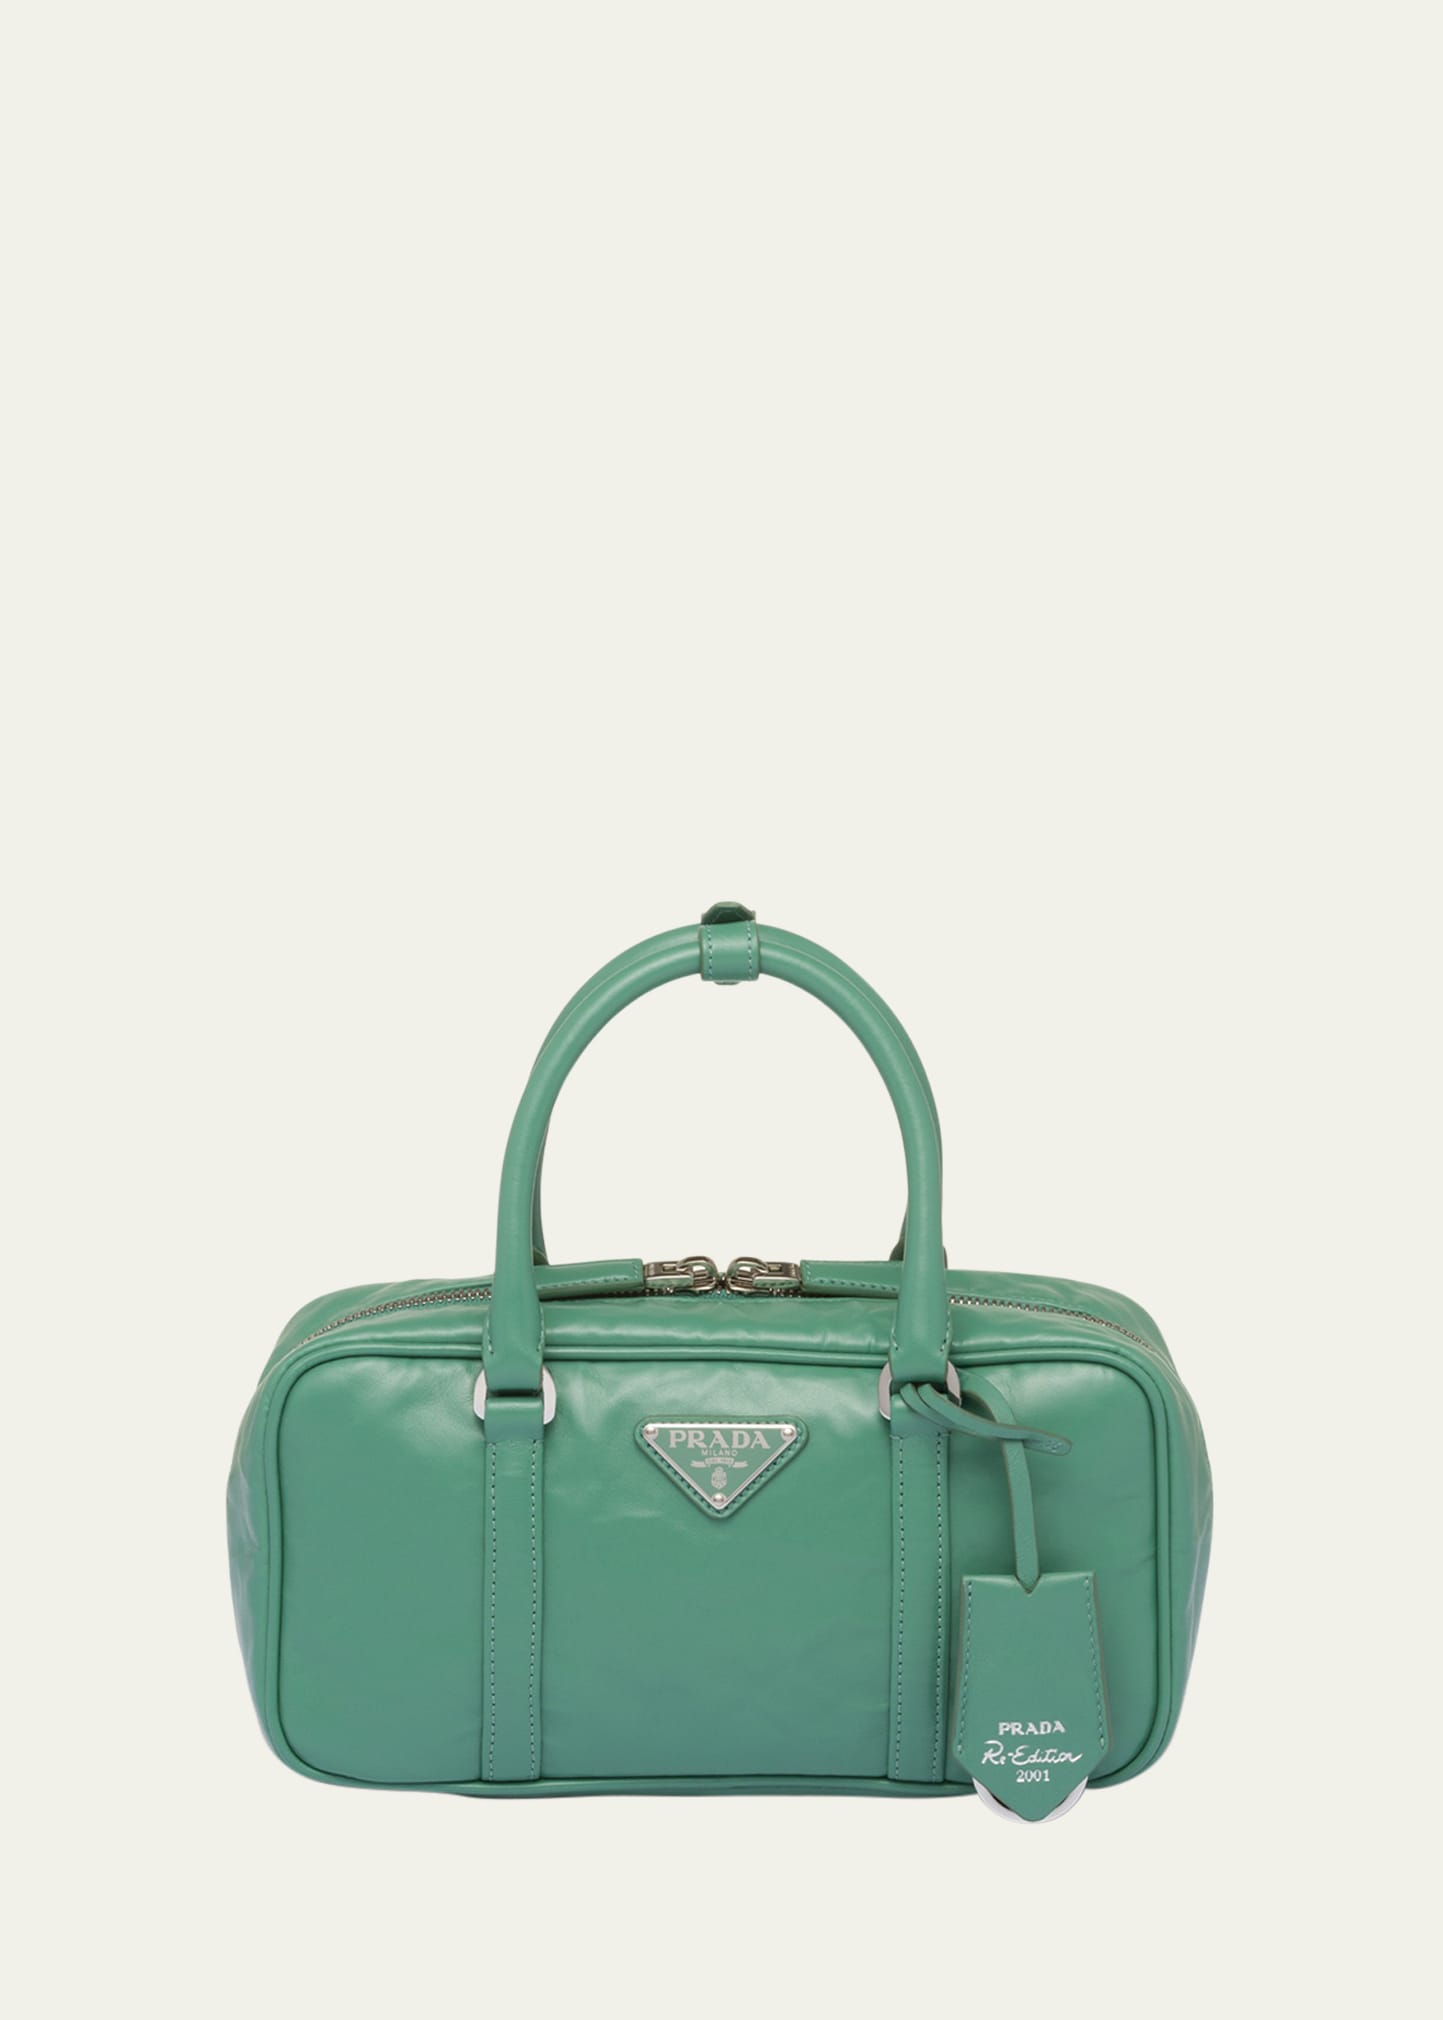 Prada Re-Edition in saffiano leather is one of my favorite styles, so I had  to pick-up another color! : r/handbags